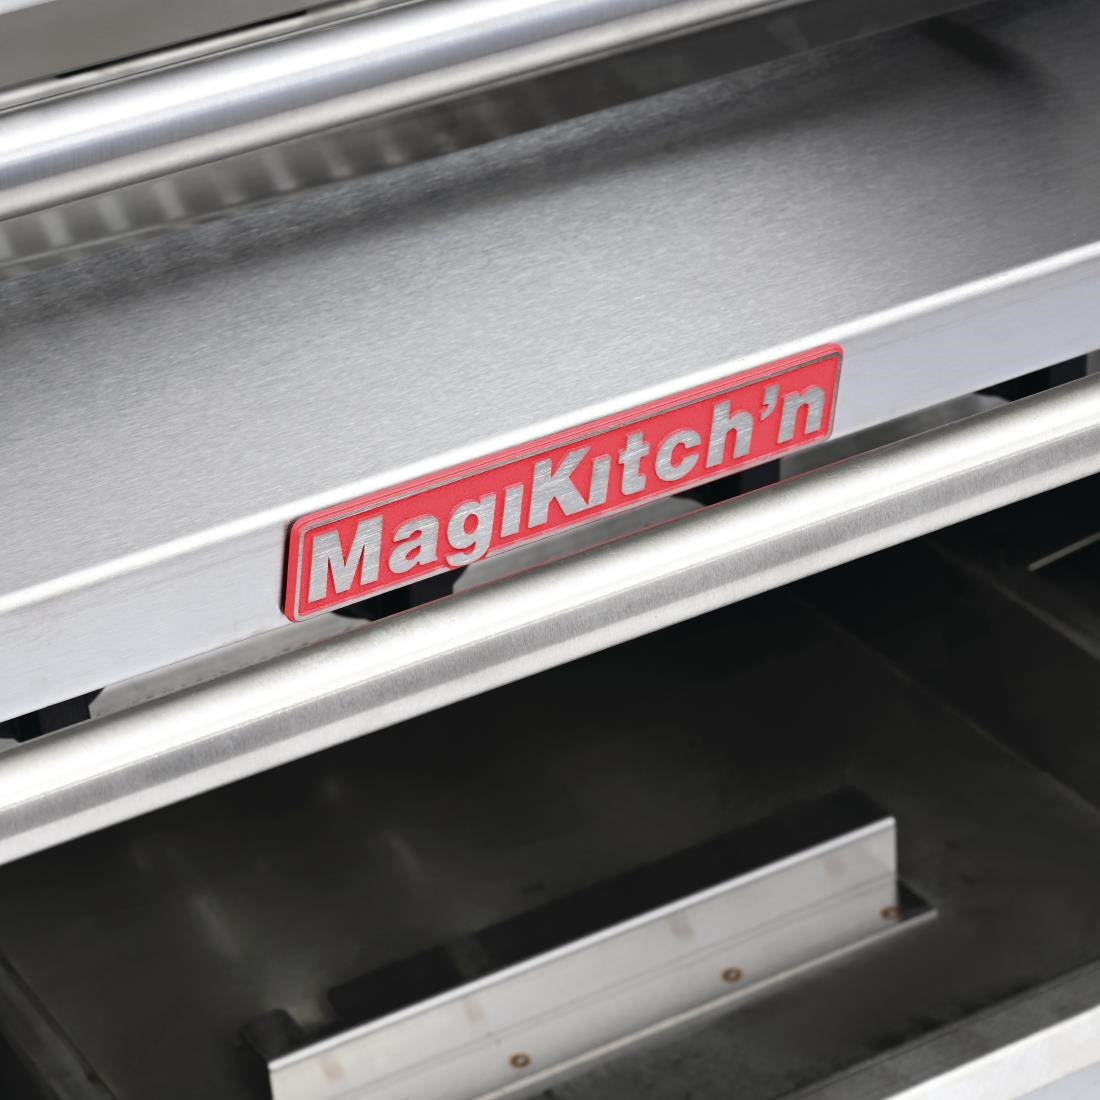 FP887 MagiKitch'n Gas Chargrill RMB624 JD Catering Equipment Solutions Ltd